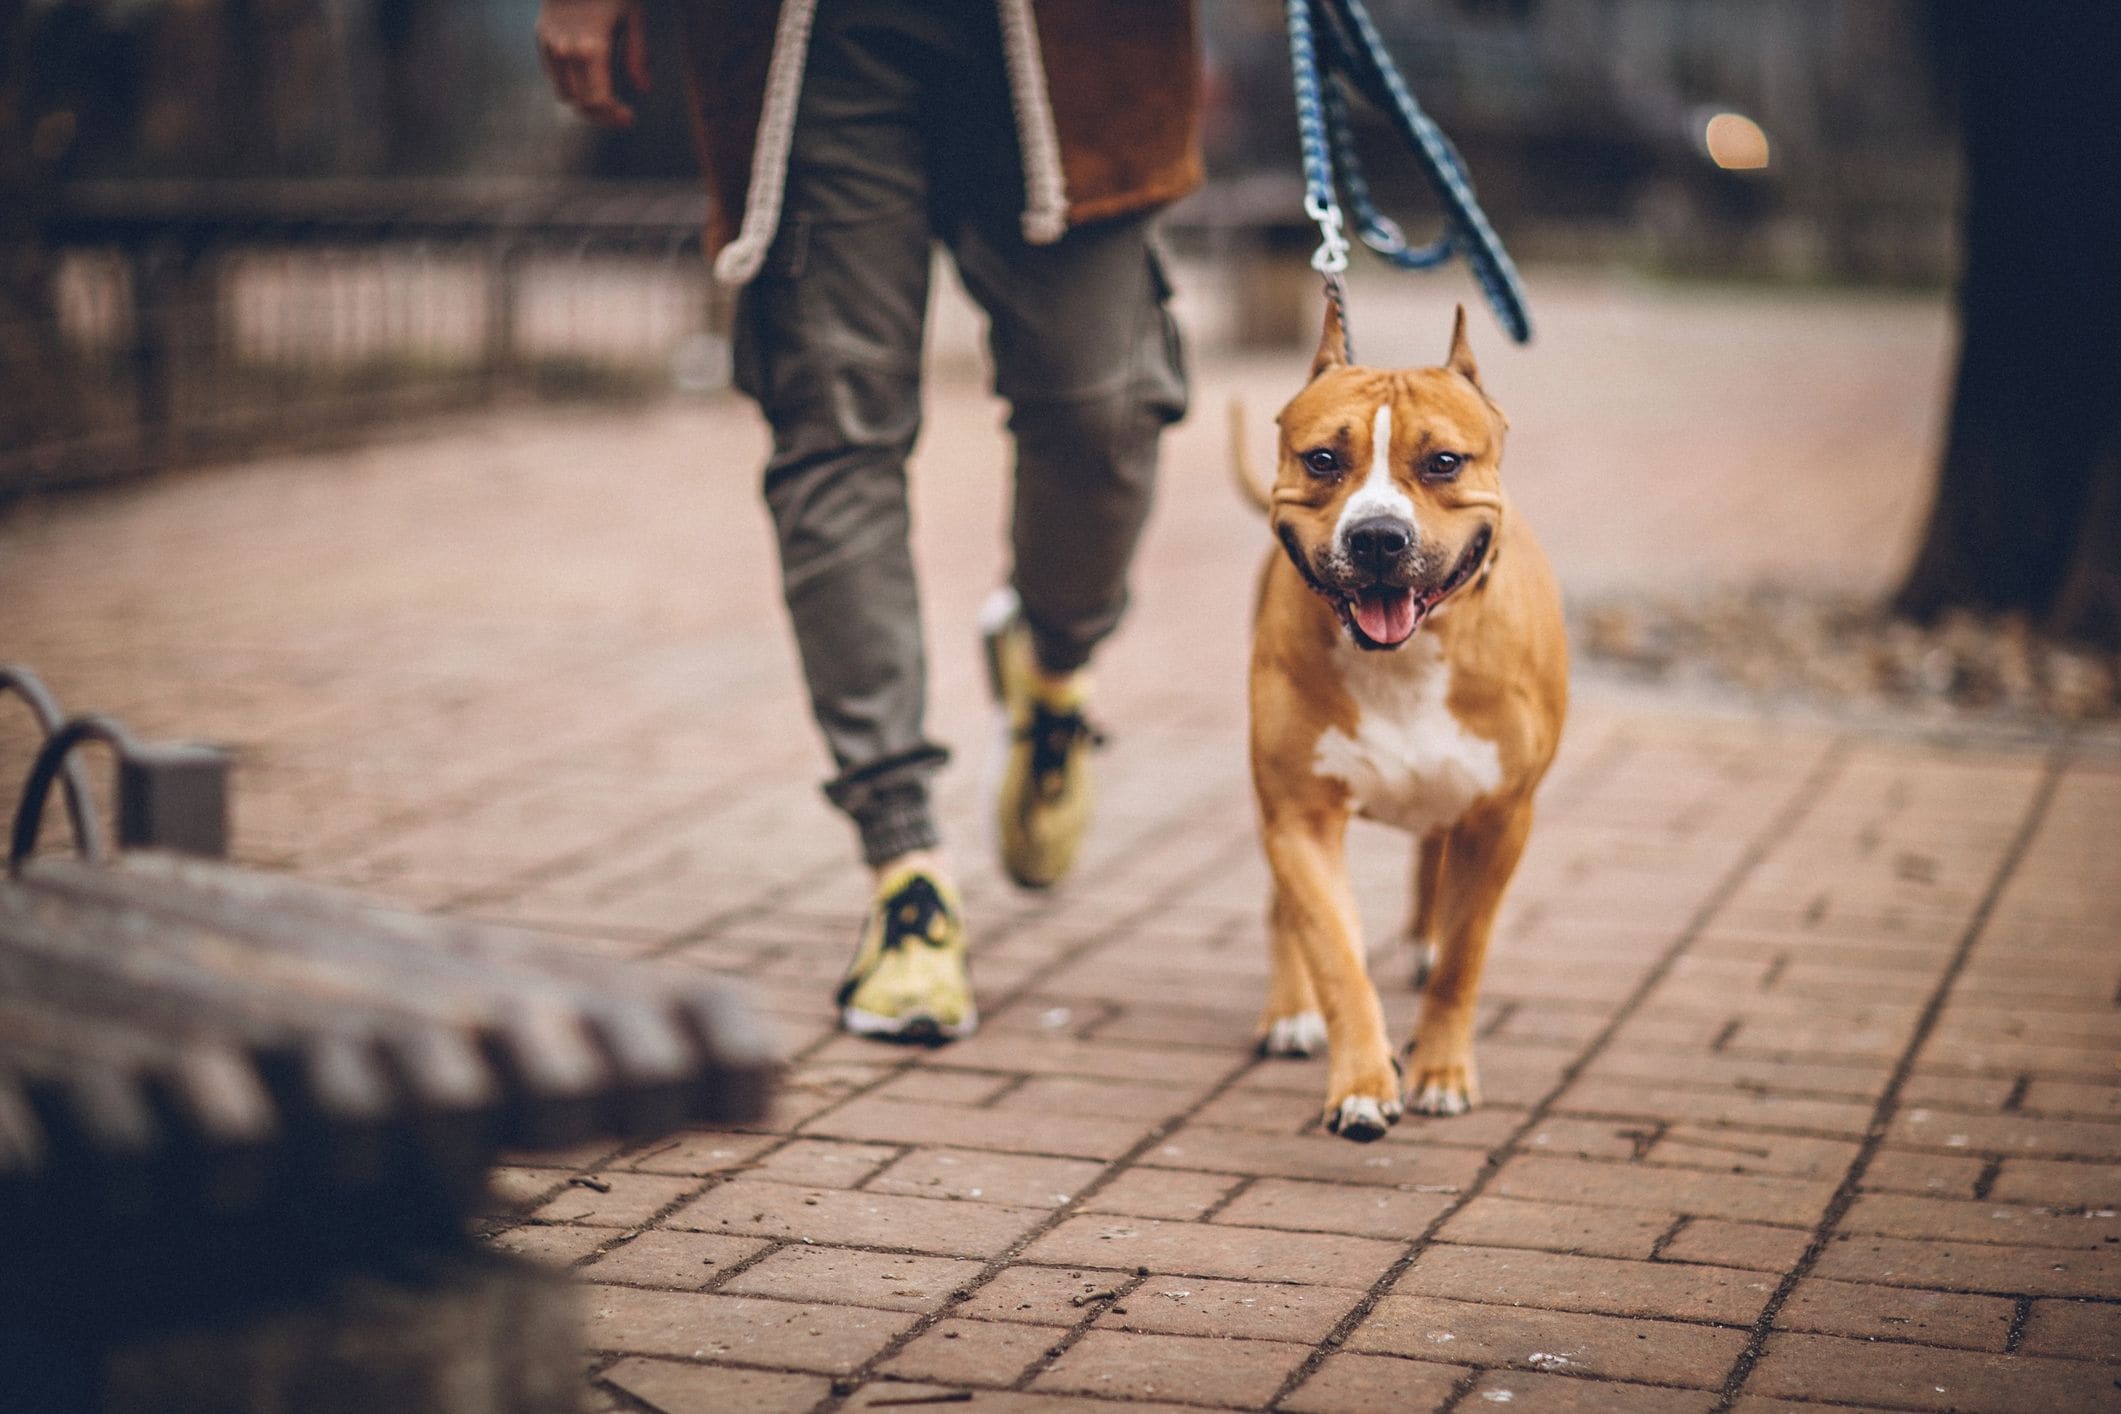 Pet sitter or boarding kennel: Which is right for your dog?